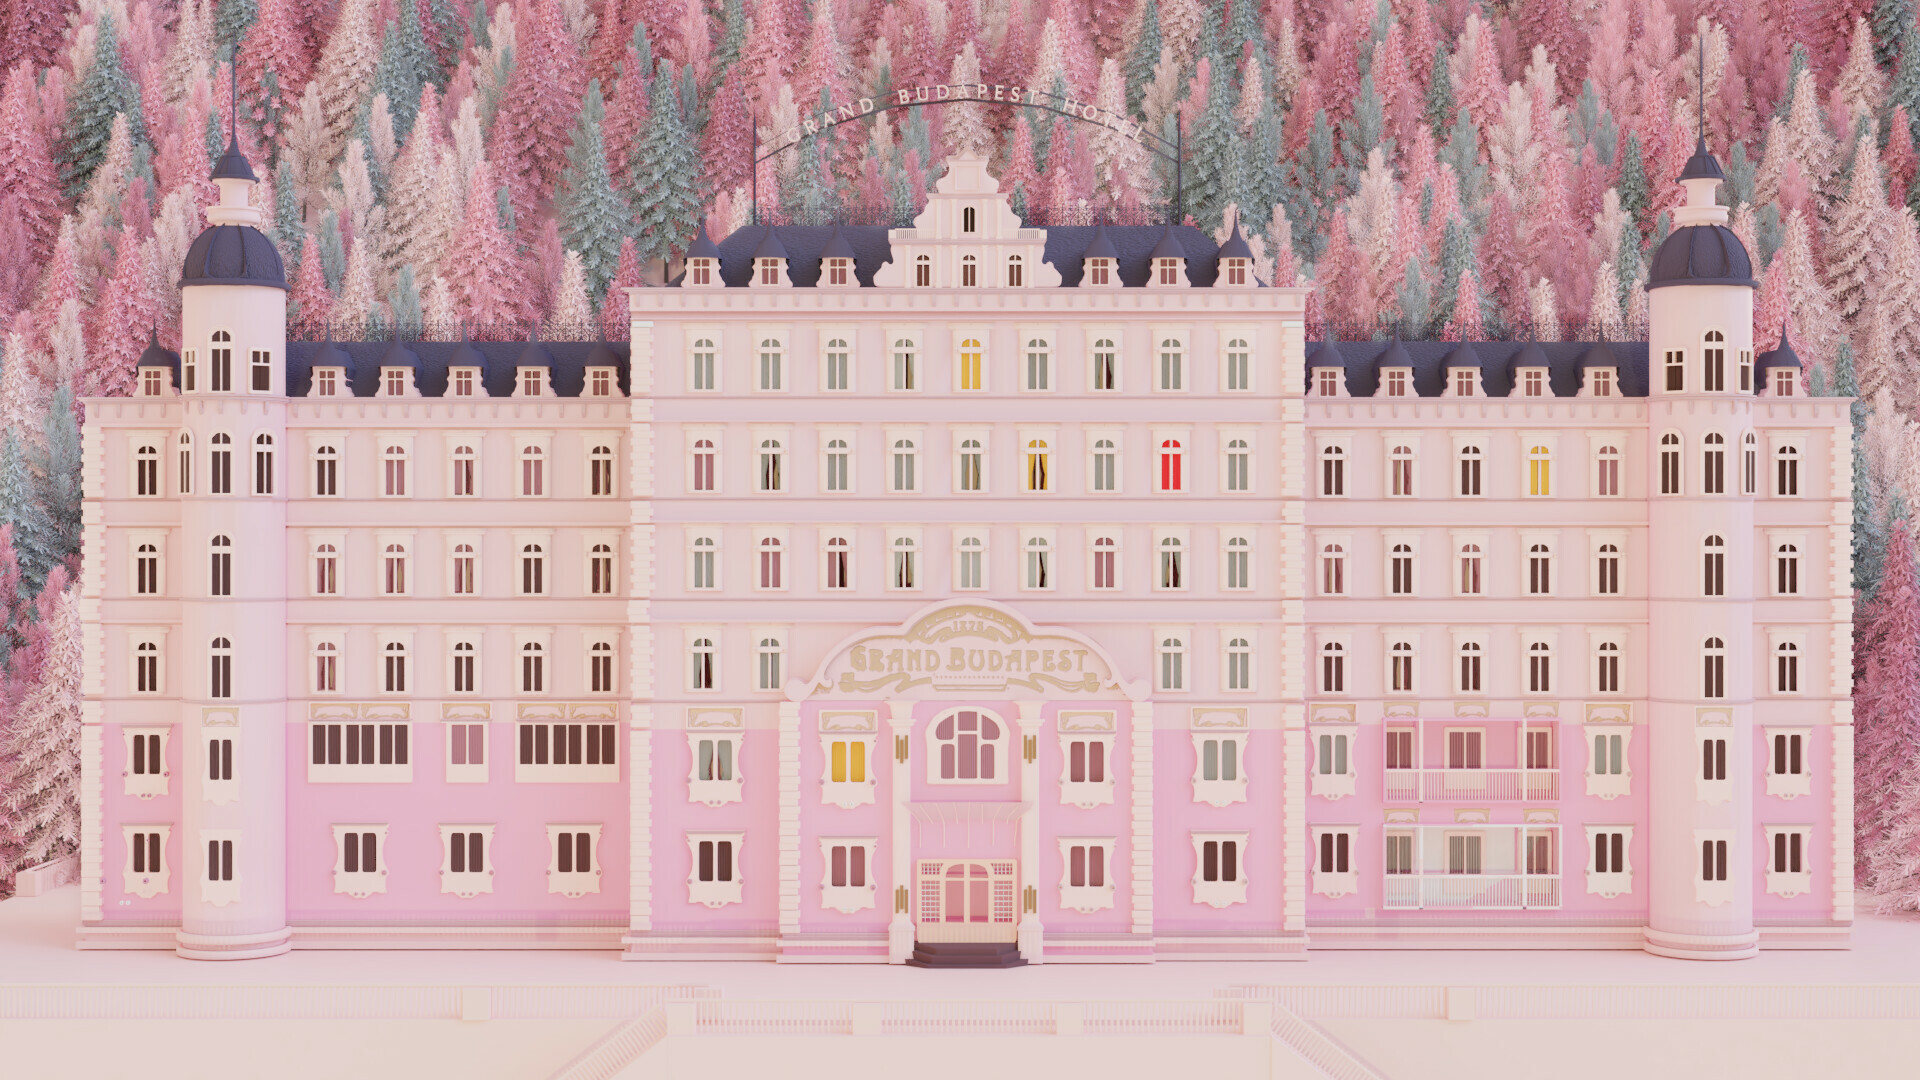 Mohammad Abrar Aleef, The Grand Budapest Hotel, Wes Anderson's creation, Artistic brilliance, 1920x1080 Full HD Desktop